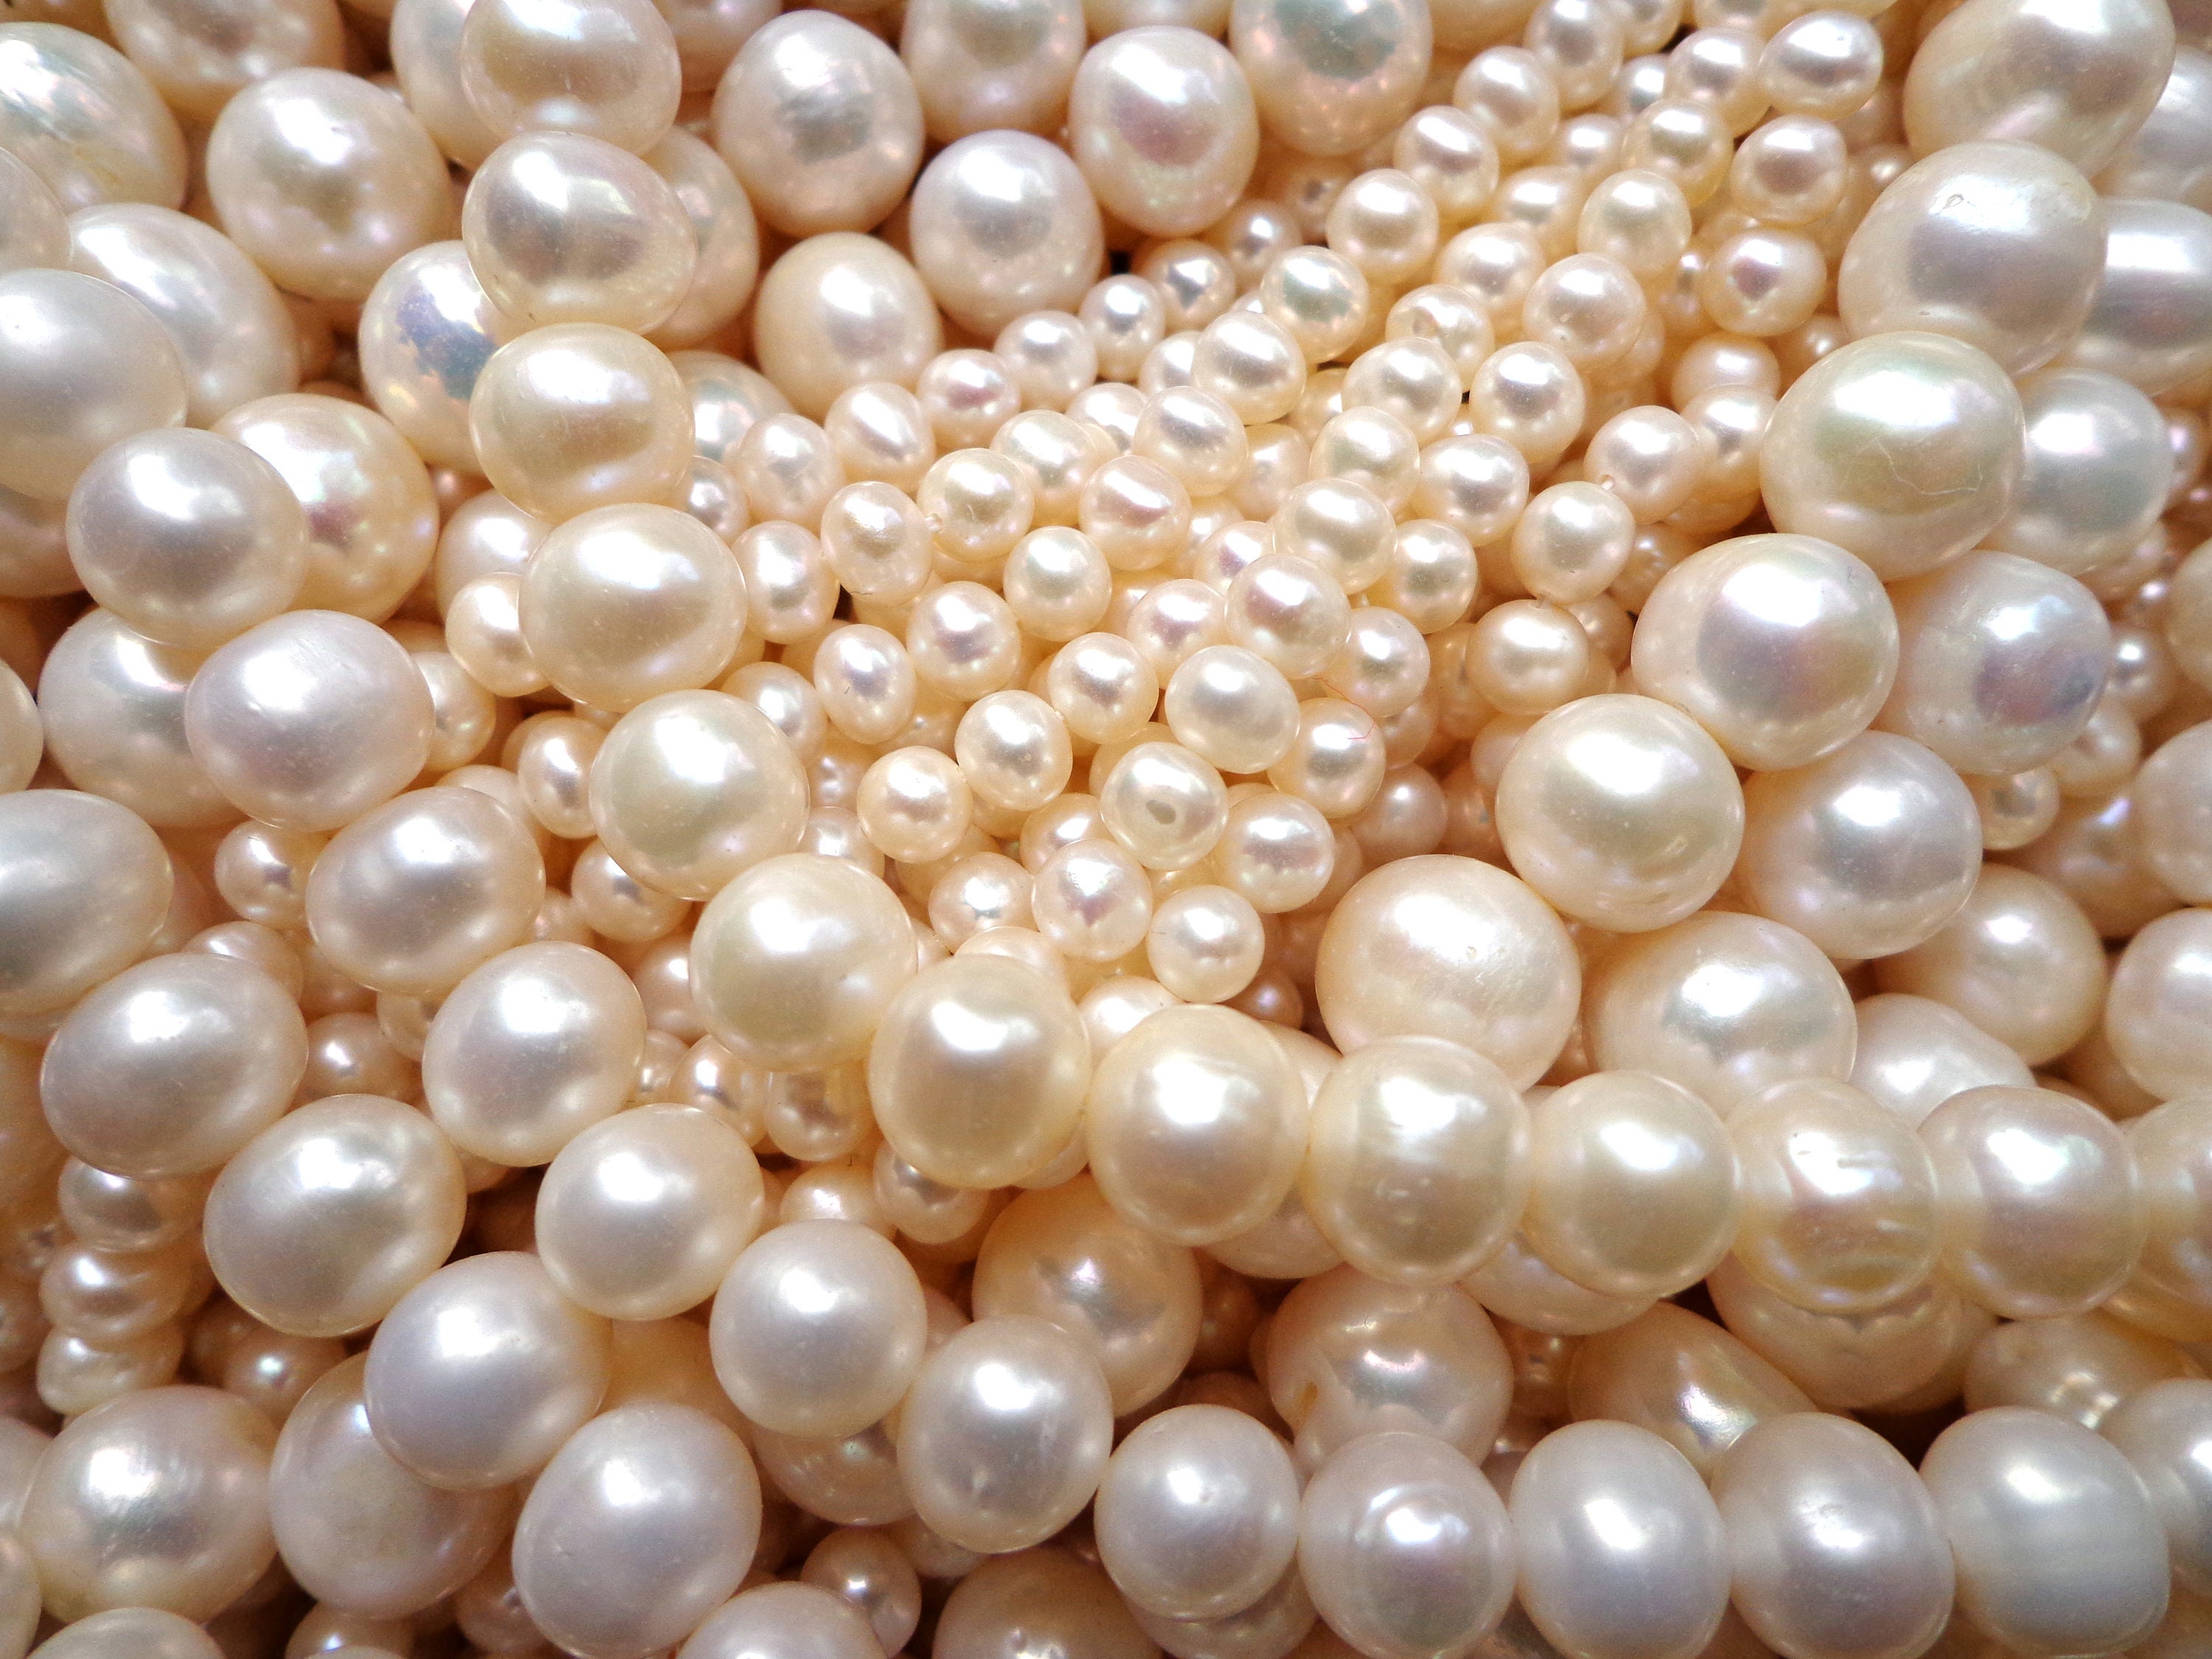 100 Quality Faux PEARL BEADS 4mm 5mm 6mm 8mm Crafts-Sewing  Jewellery-Wedding UK